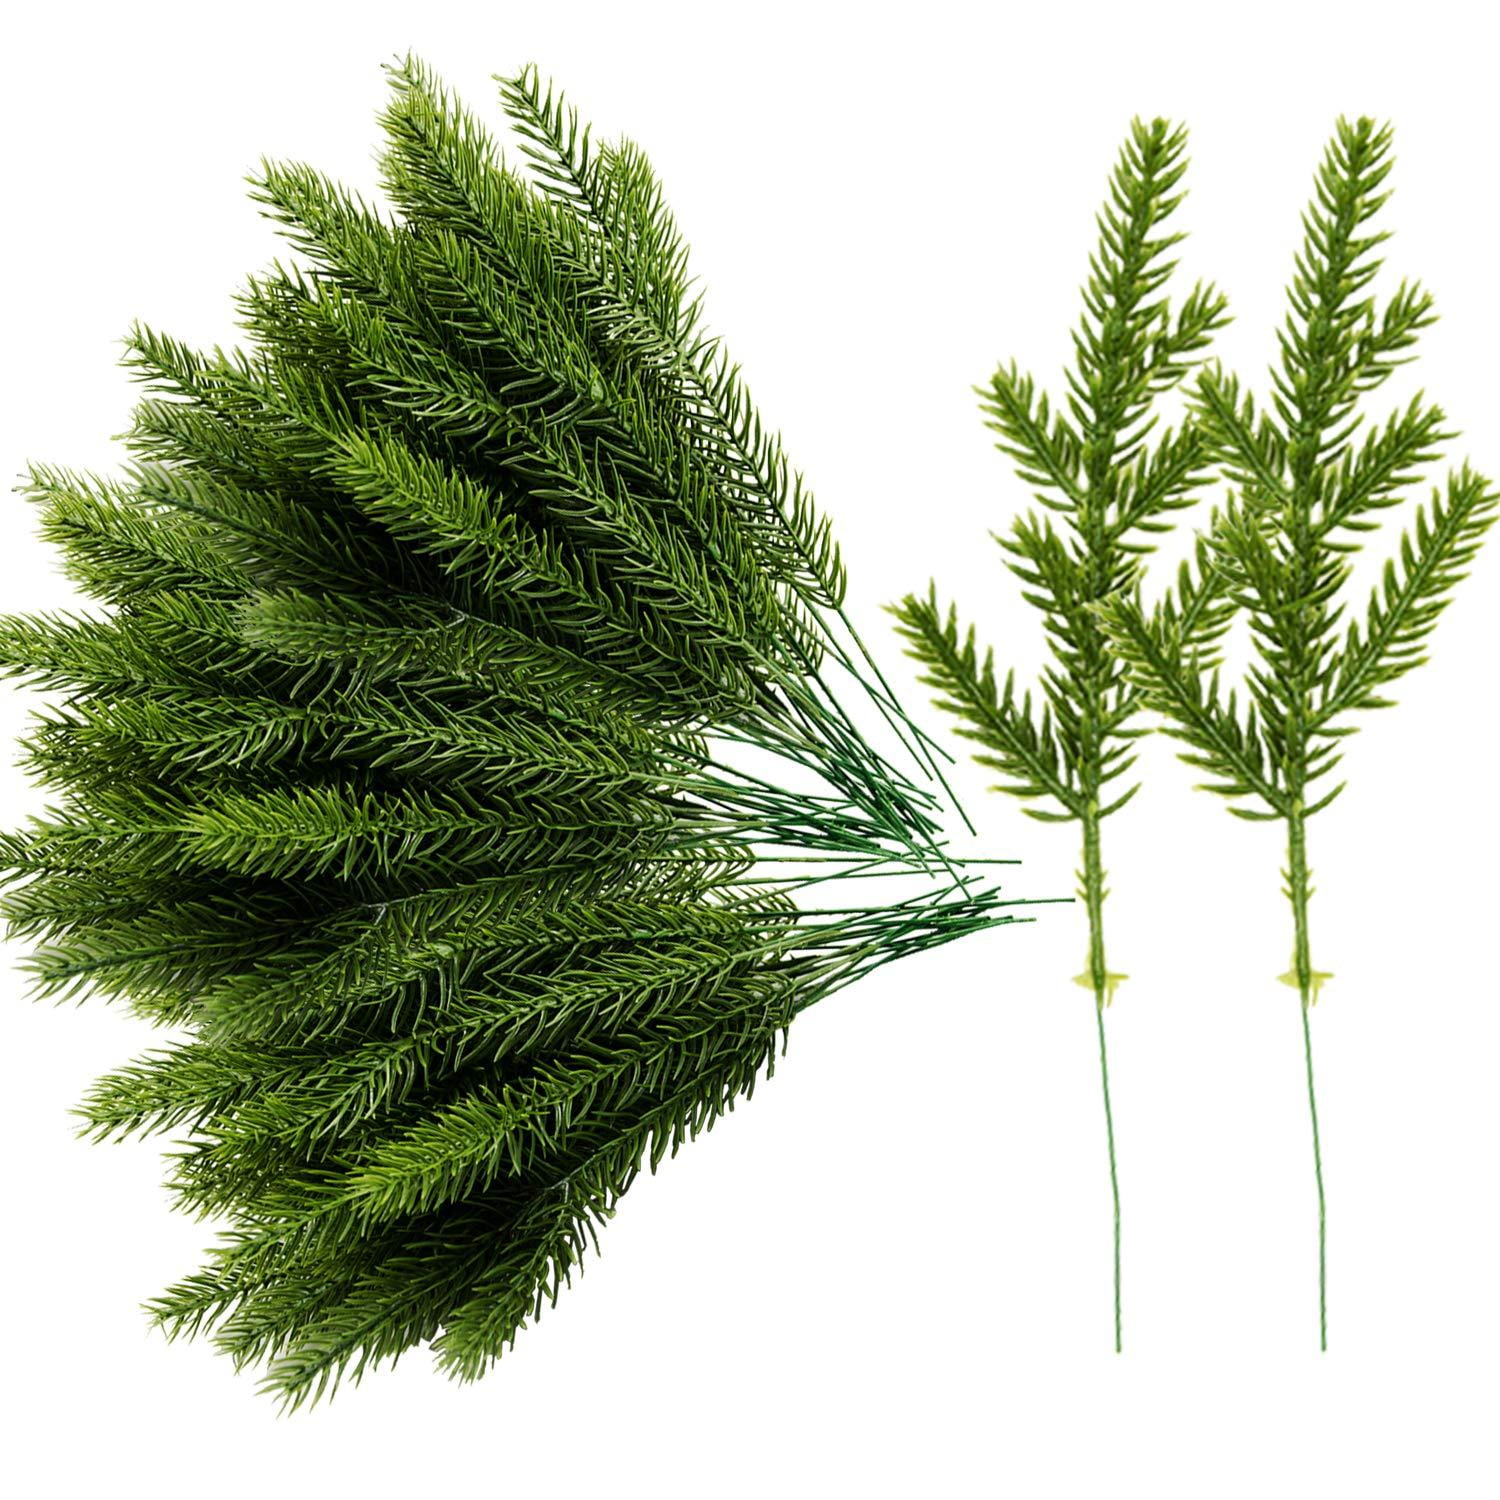 Moobom Artificial Pine Tree Branches 50-Pack Green Plants Pine Needles DIY Accessories for Garland Wreath Christmas Embellishing and Home Garden Decor